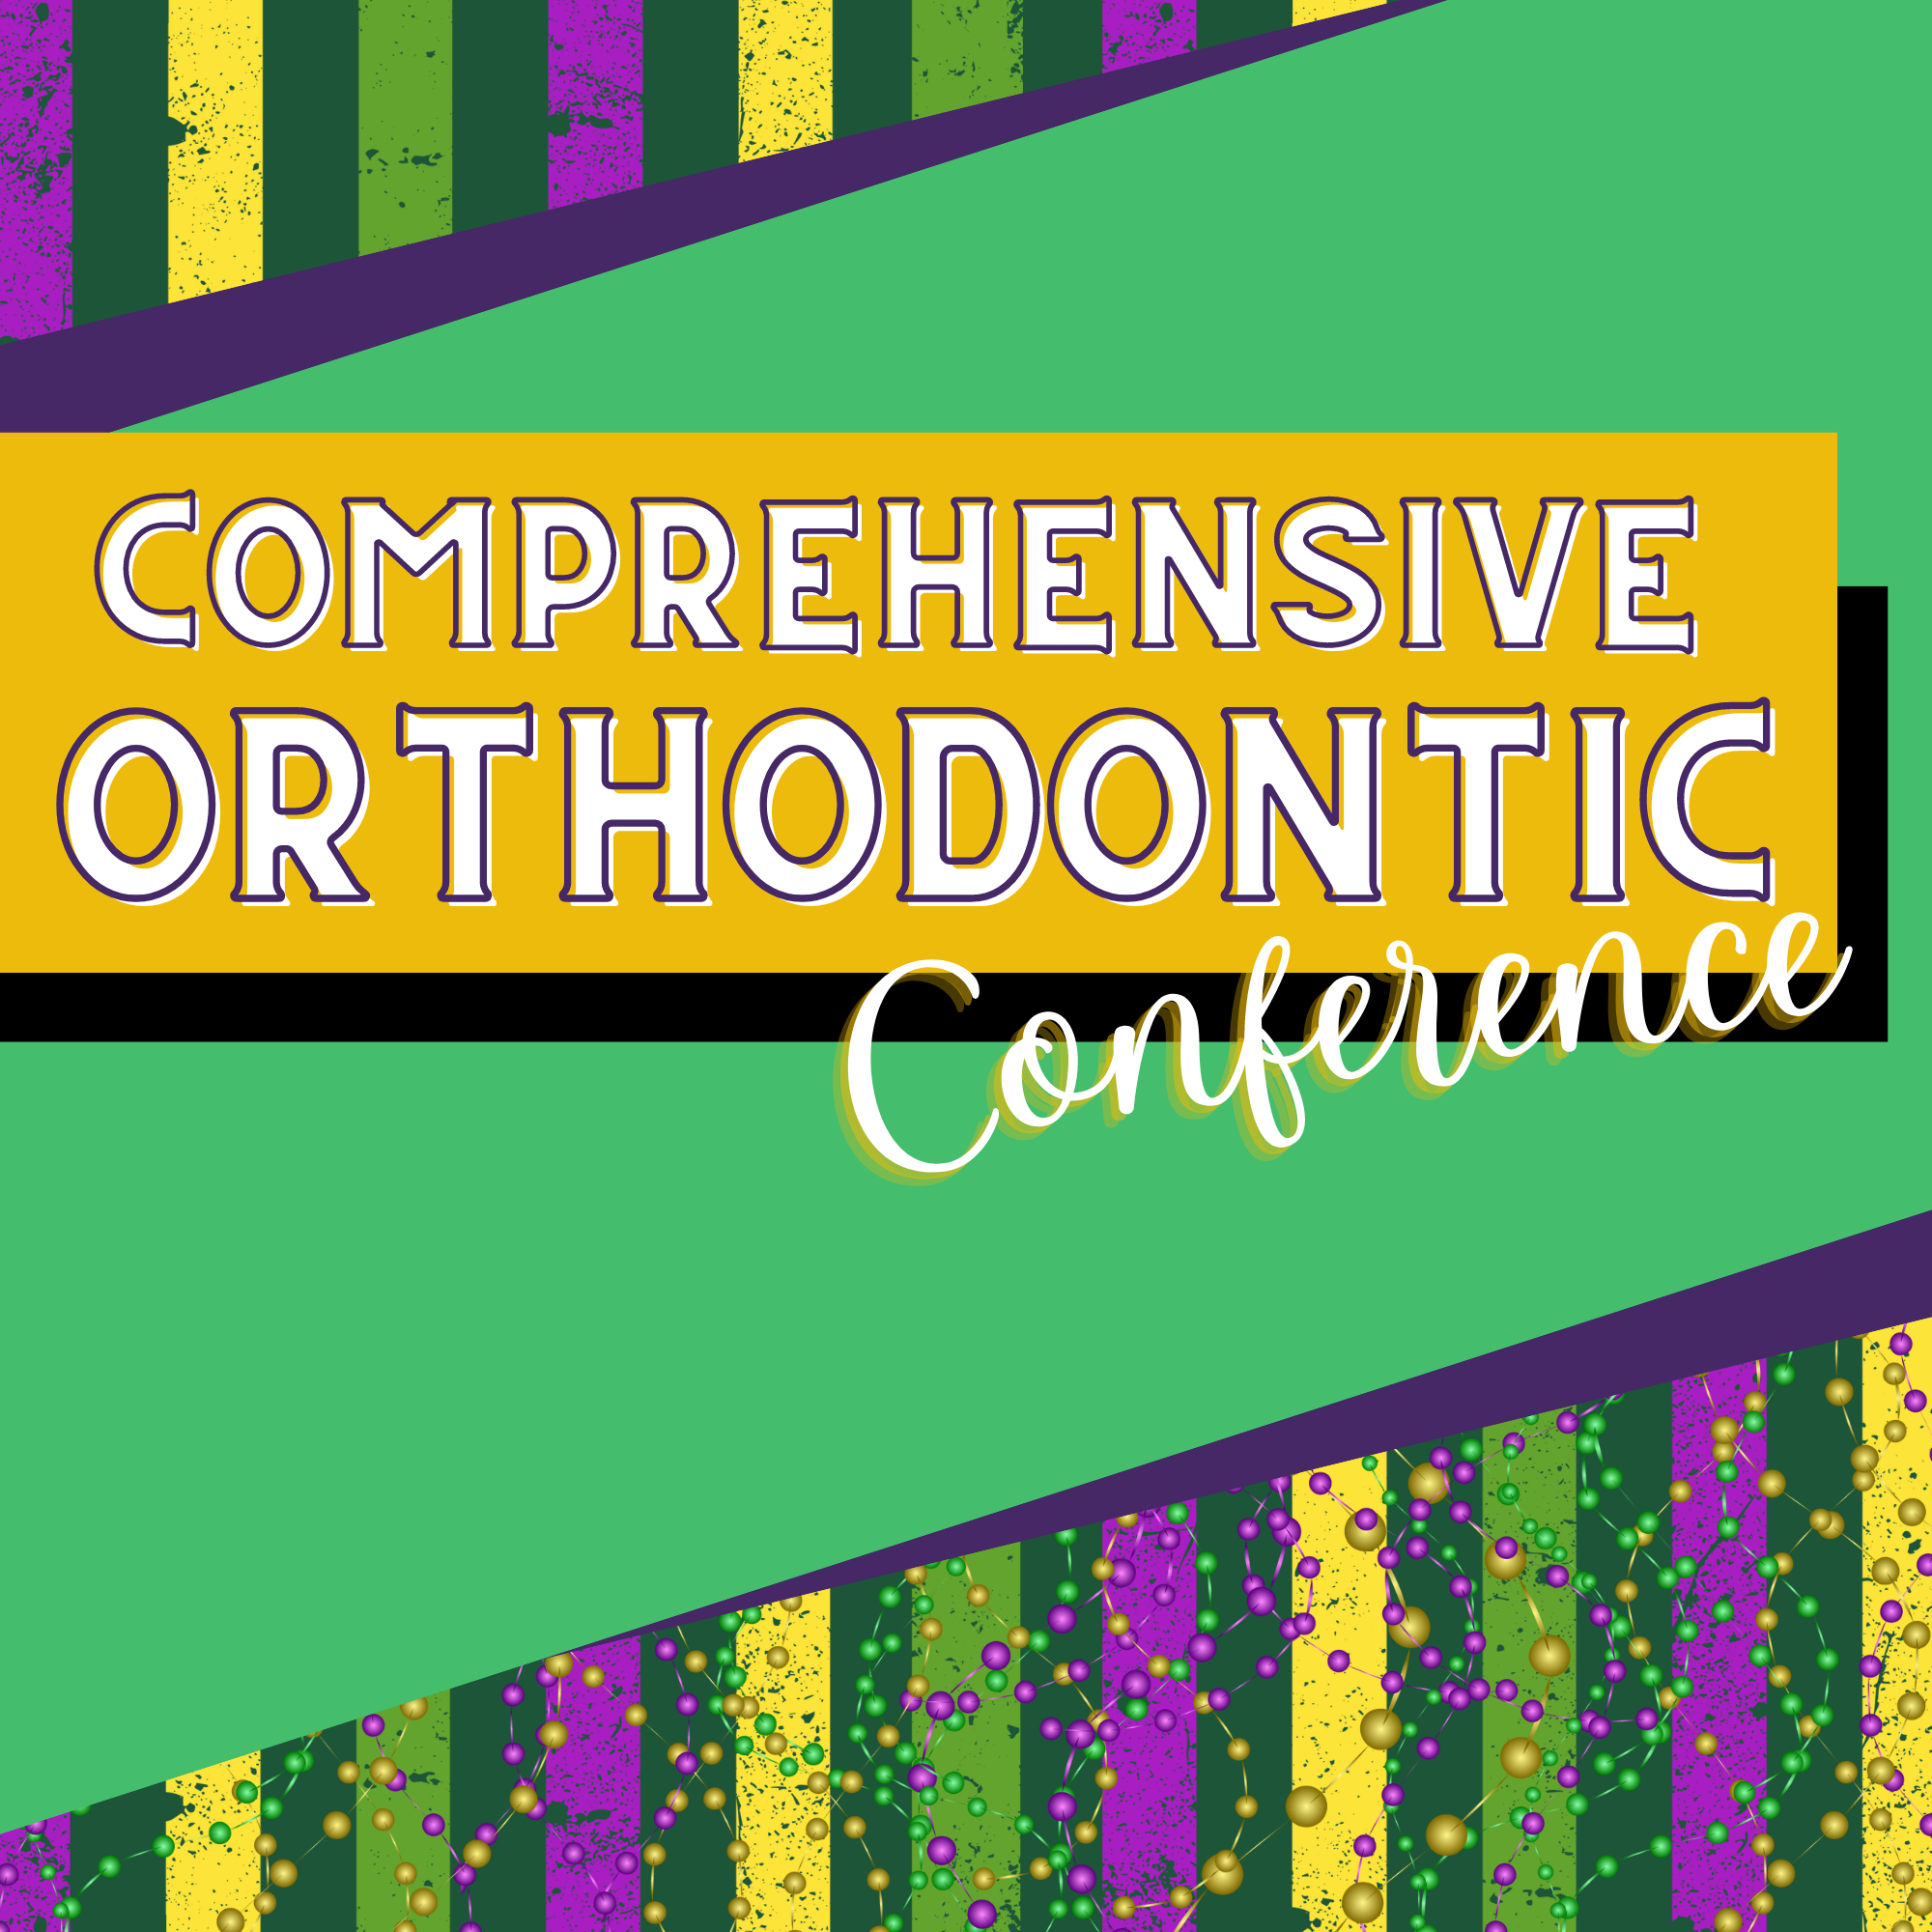 Fourth conference - Comprehensive orthodontic conference hosted by LOU CHMURA